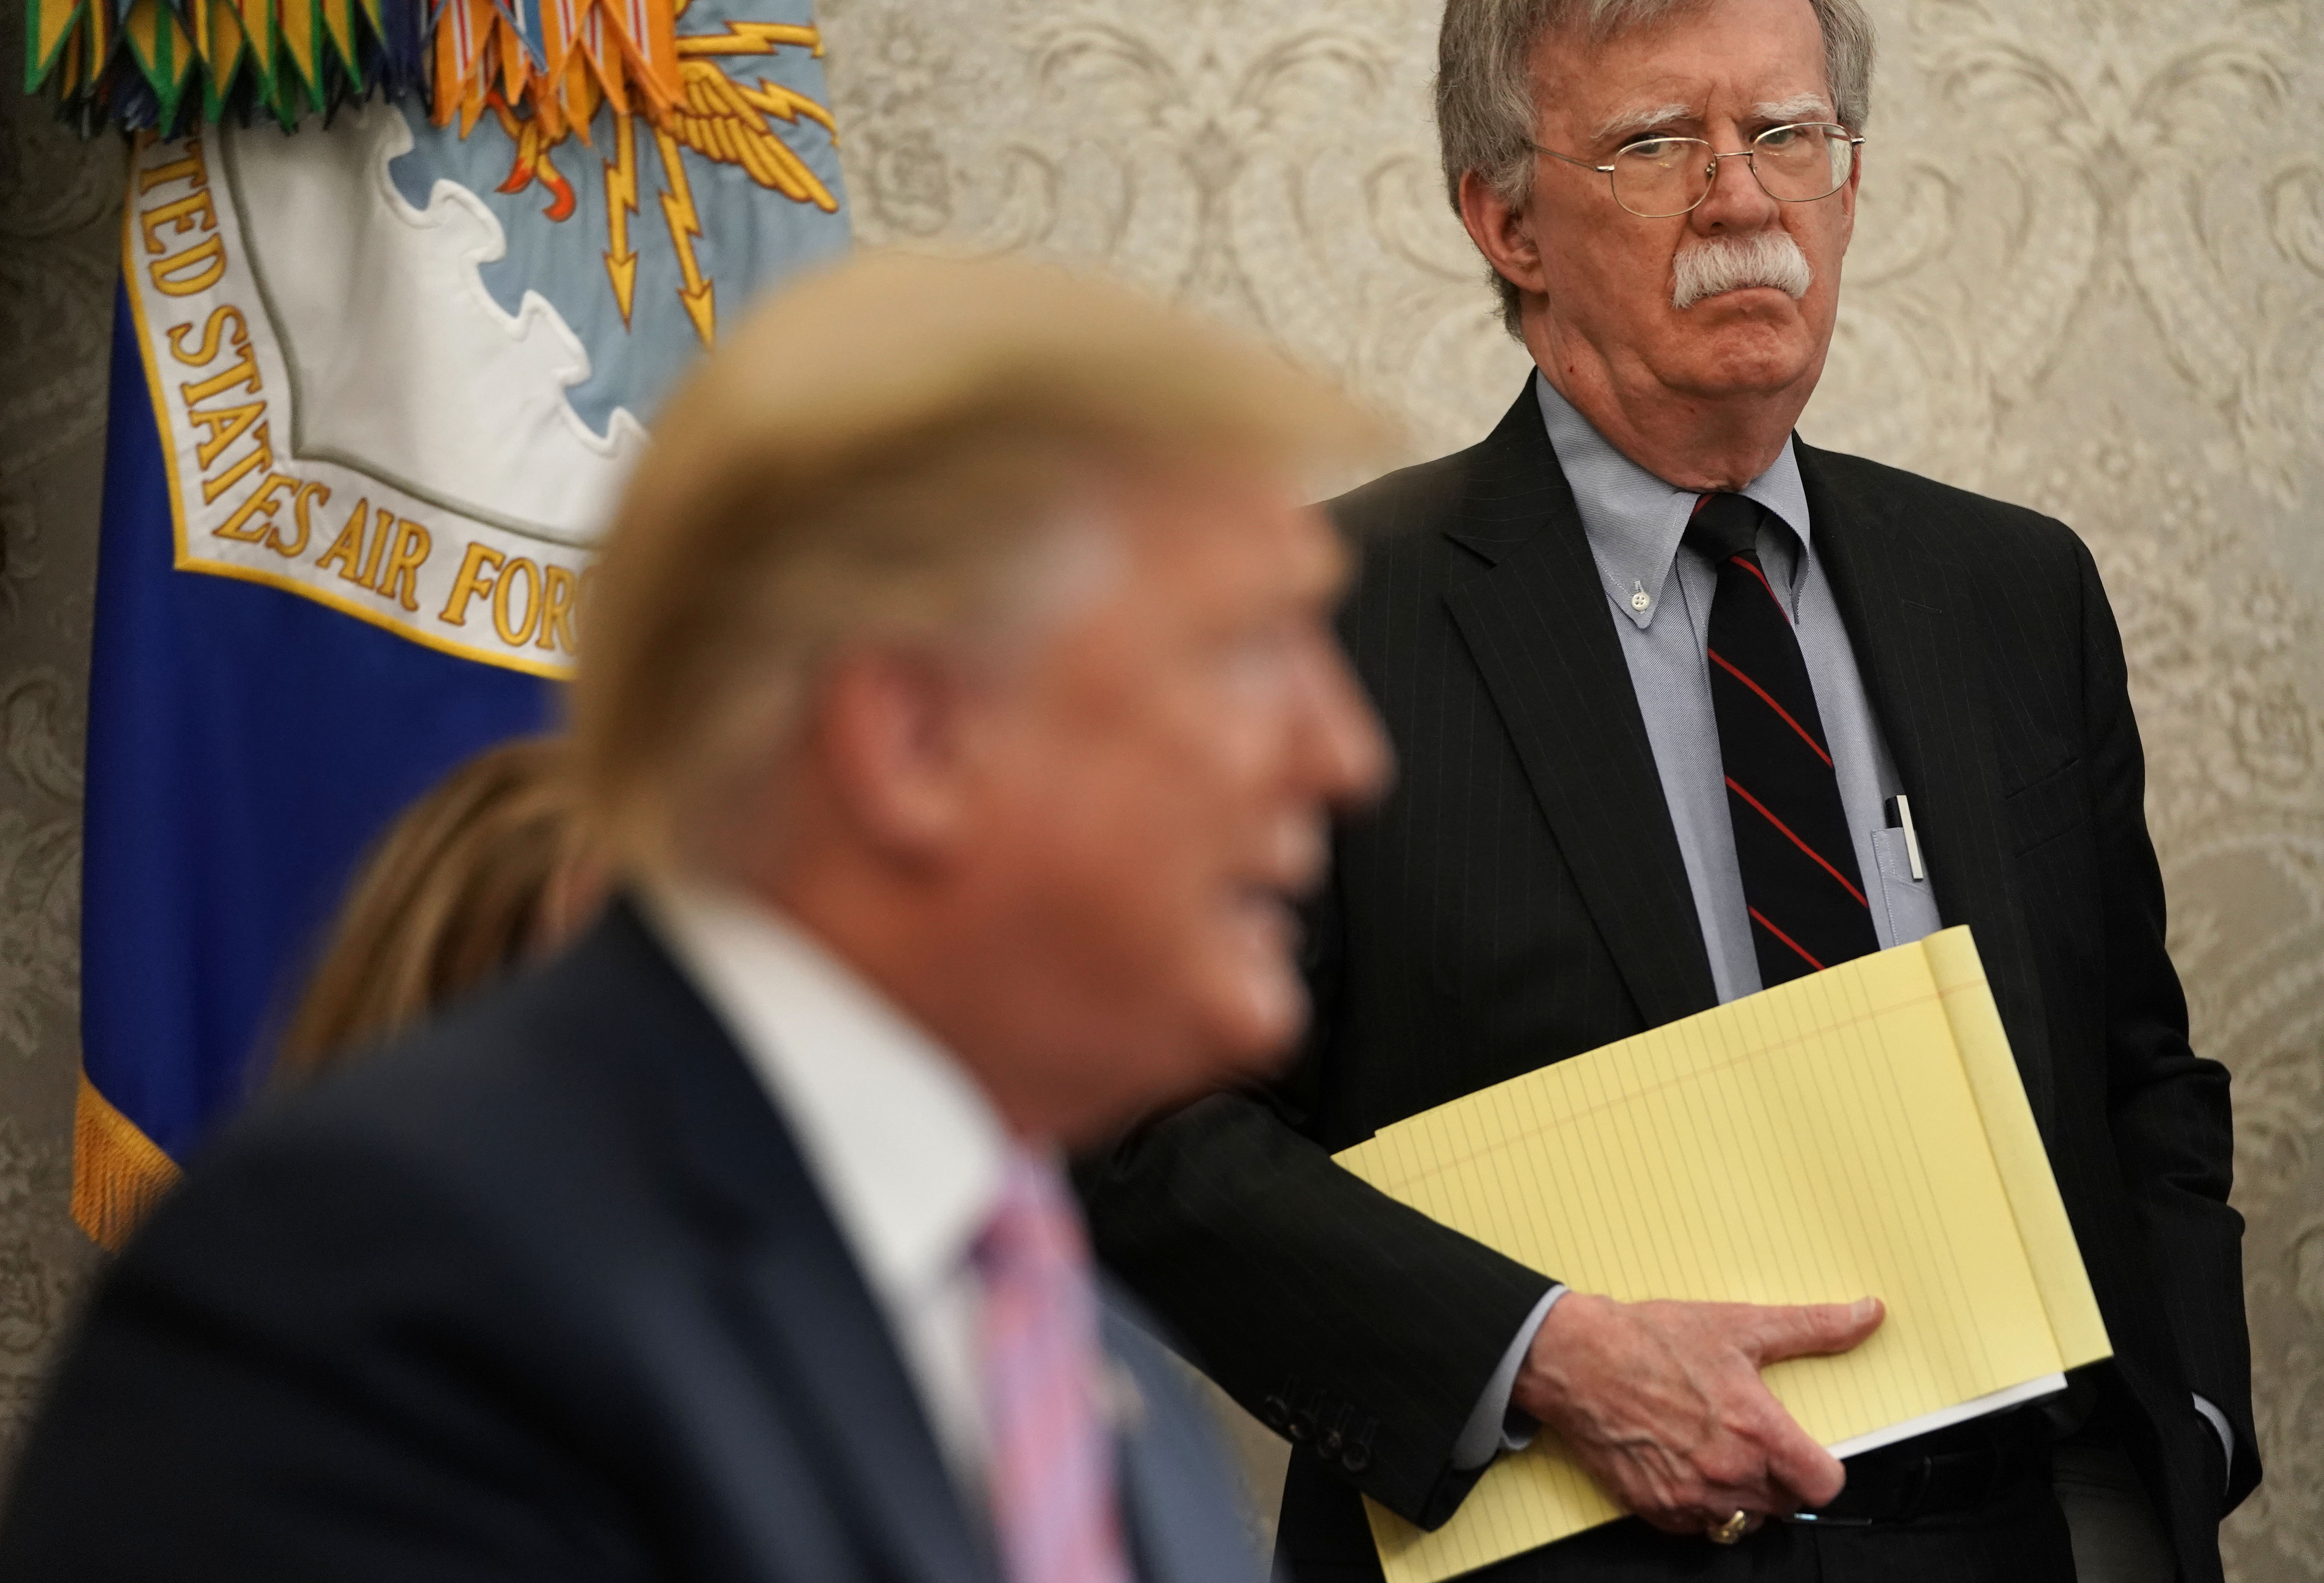 Bolton behind Trump holding a yellow notepad.